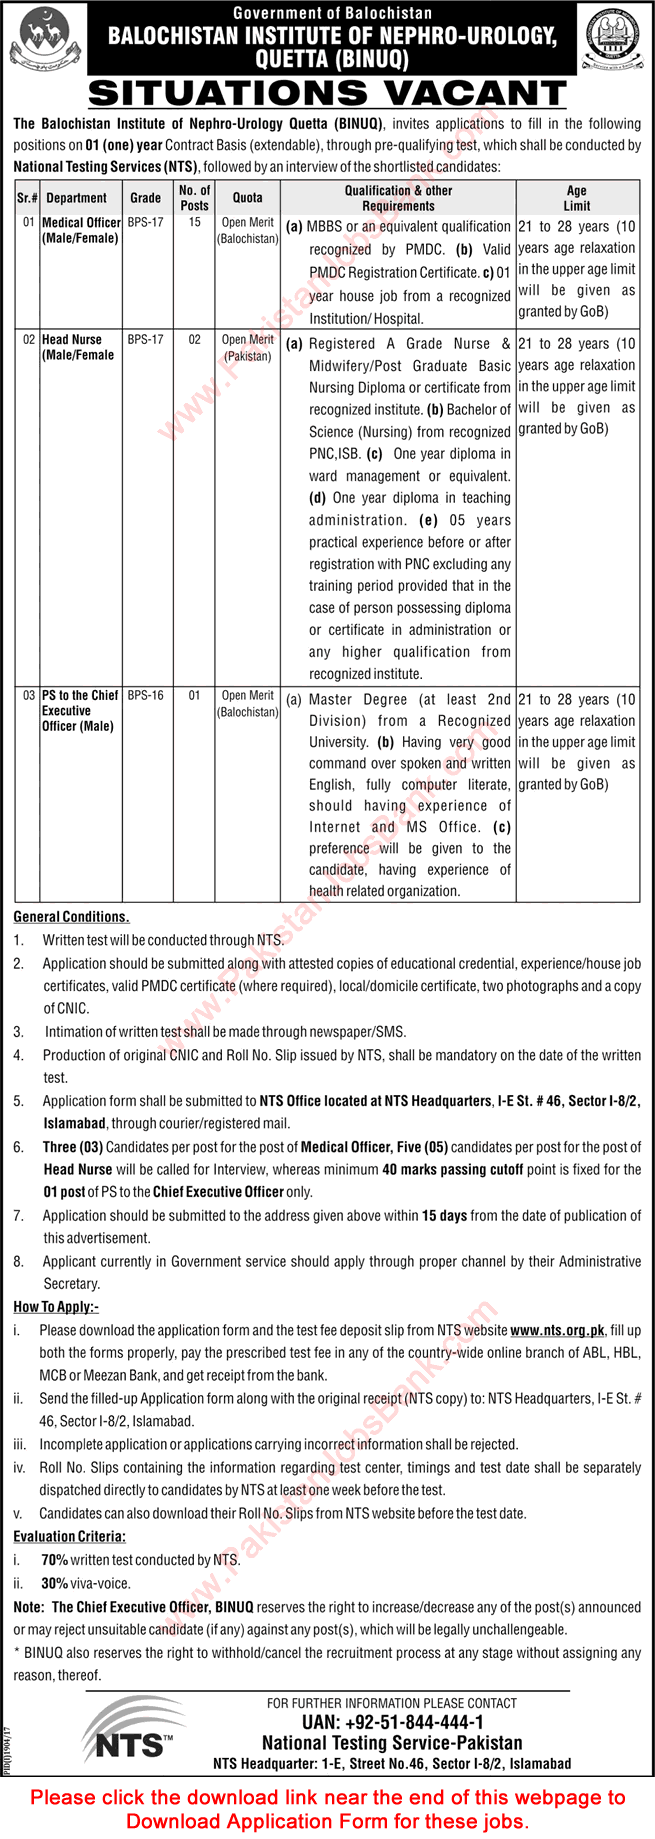 Balochistan Institute of Nephro Urology Quetta Jobs October 2017 NTS Application Form Medical Officers & Others Latest